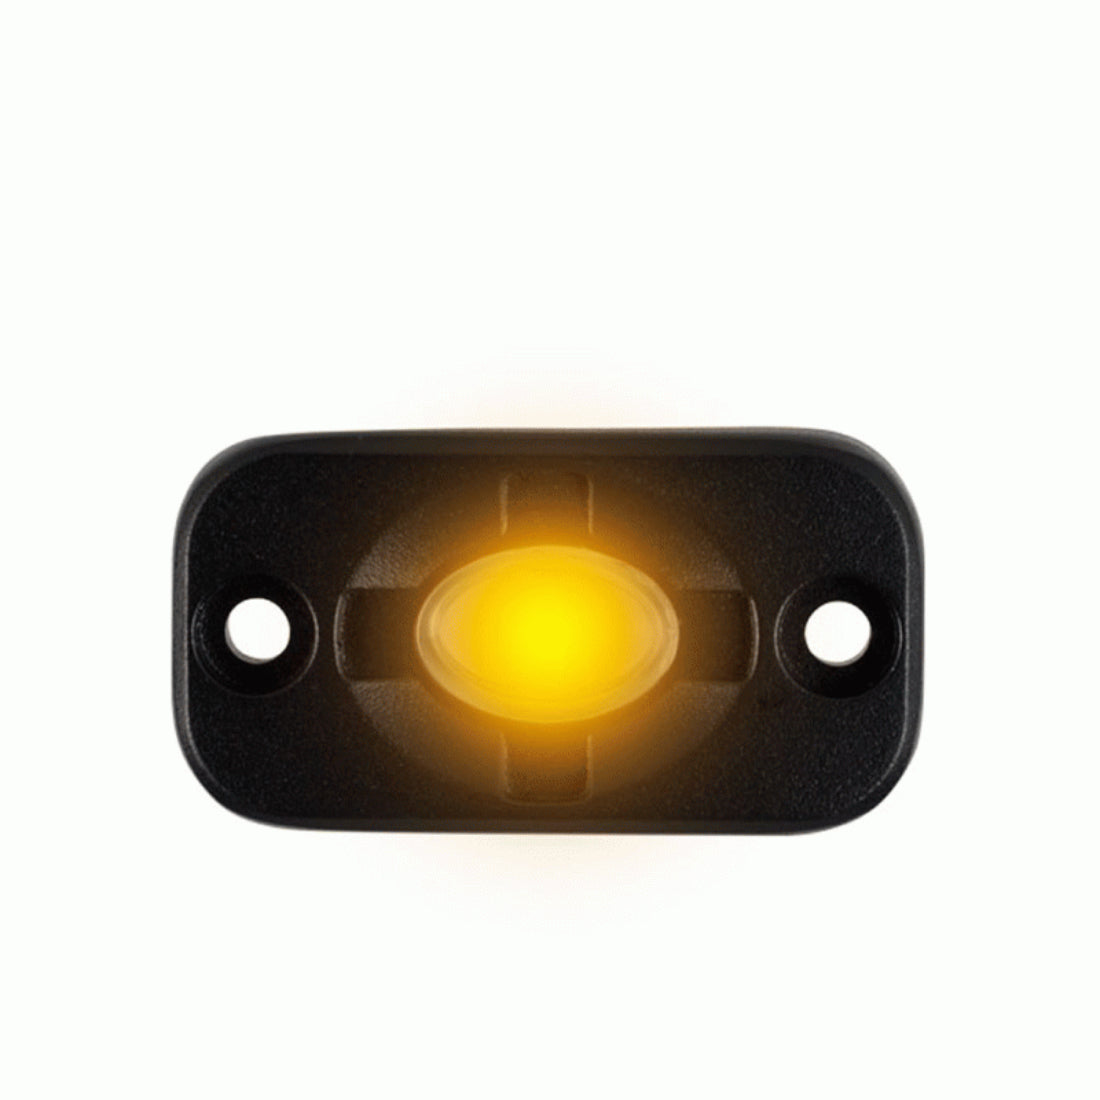 Heise by Metra HE-TL1A 1.5 x 3 Inch Auxiliary 3 LED Lighting Pod - Amber